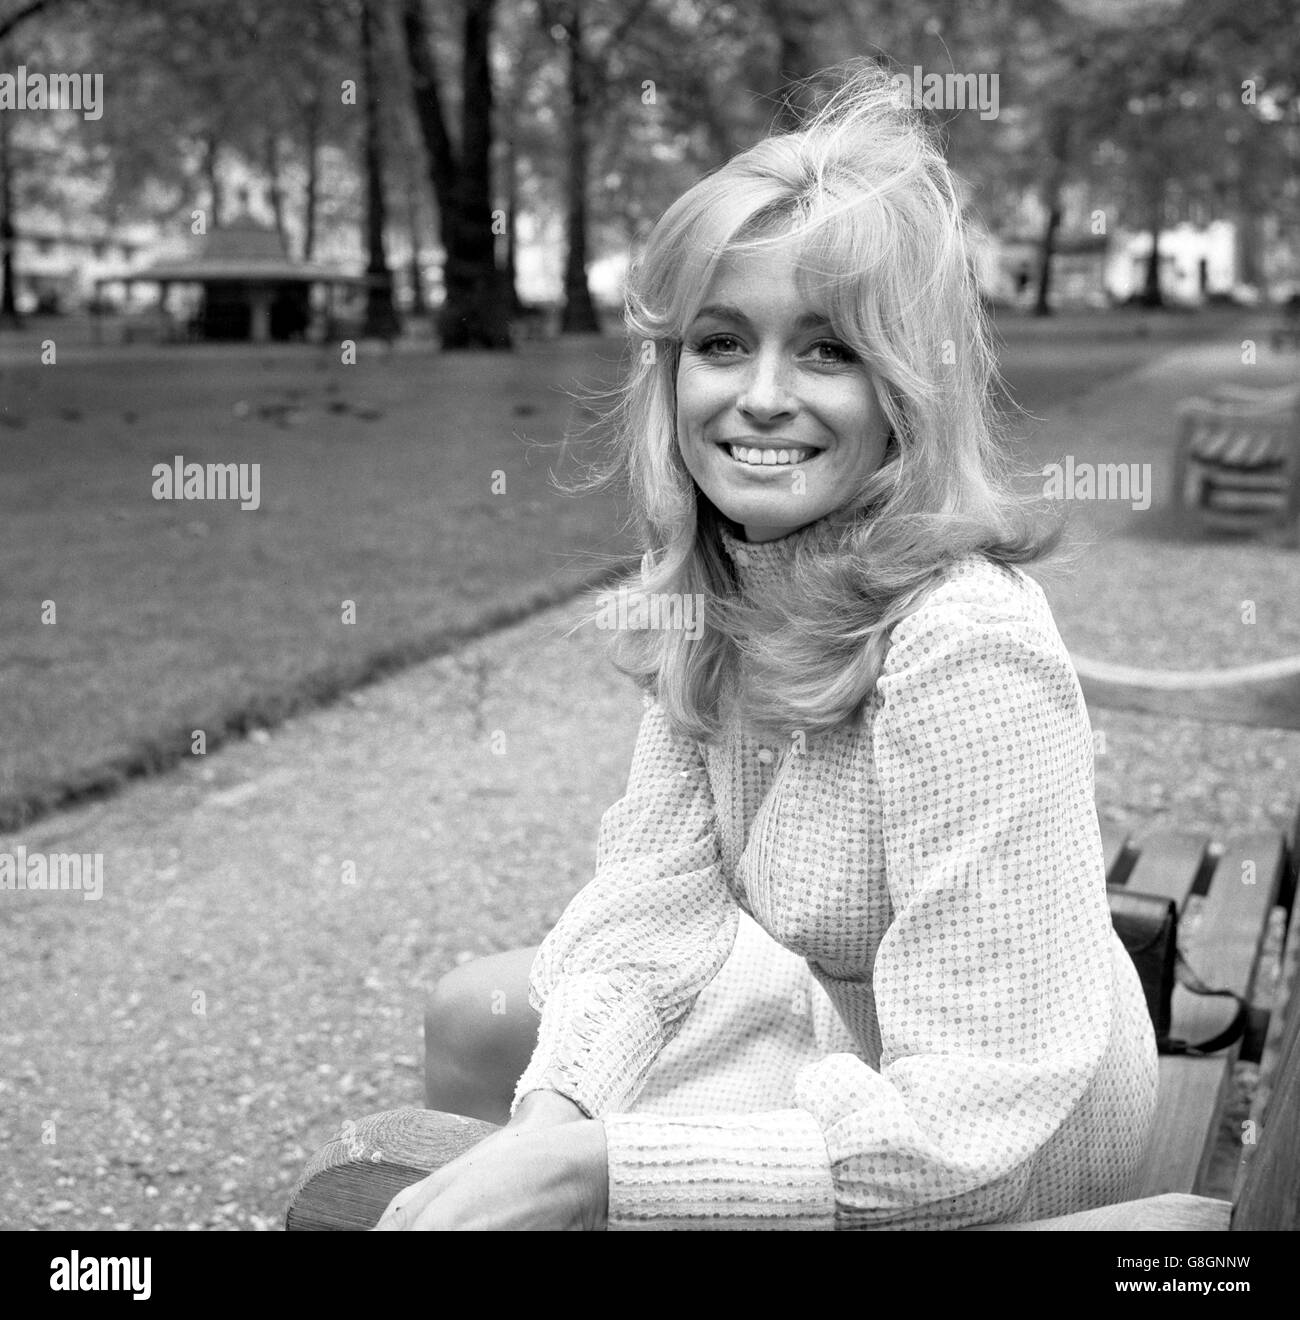 Suzy Kendall, 24, who has been given a leading role in the James Clavell film To Sir, With Love, which stars Sidney Poitier. It is being made at Pinewood Studios for Columbia Pictures. She was chosen for the role after a long search by Mr Clavell for the right girl. She was a fabric designer before becoming a photographic model. Her picture in a magazine led to small parts in films. Stock Photo